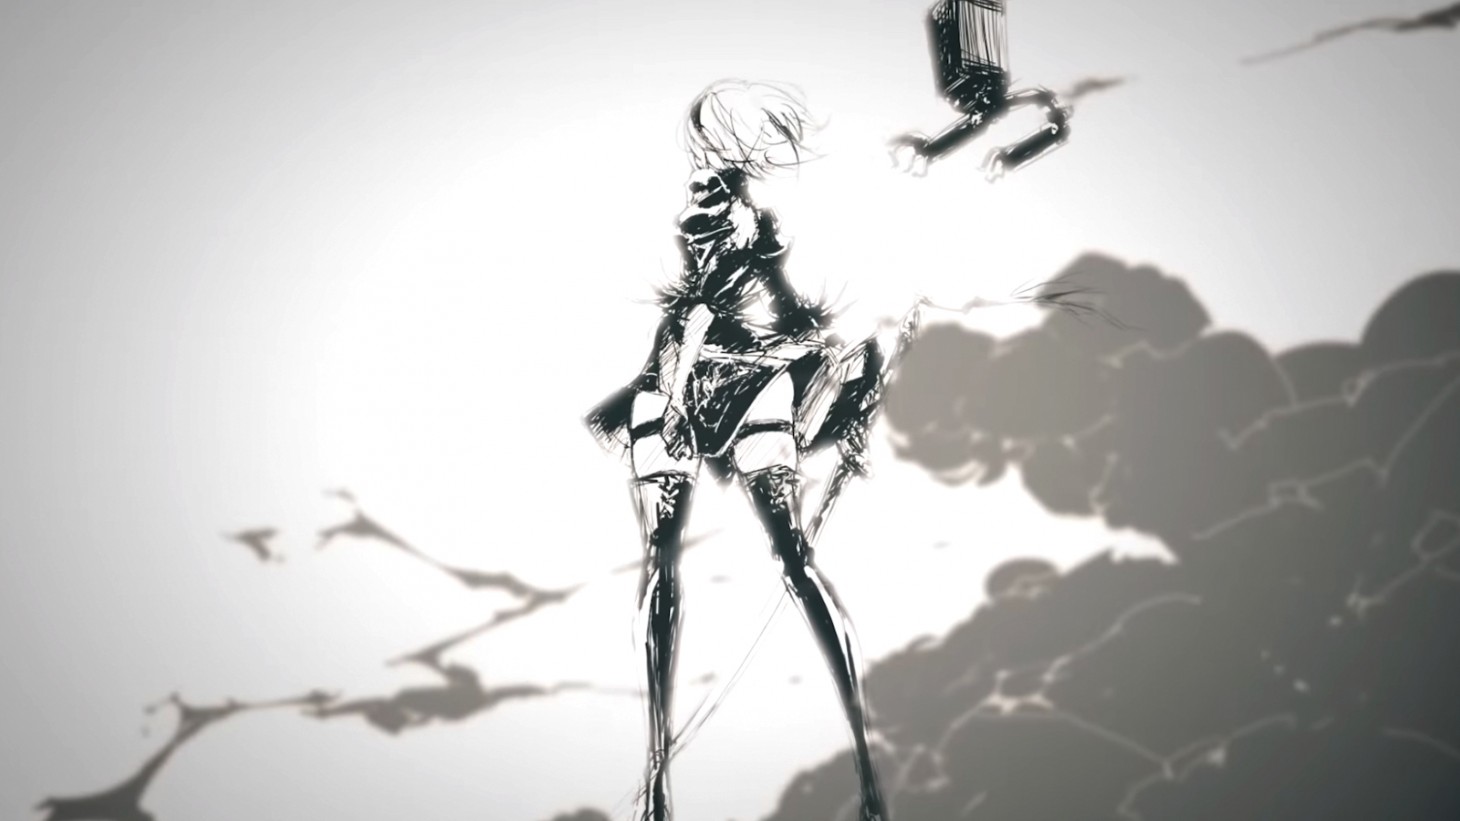 New Nier Replicant Trailer Shows Off Additional Content, Including